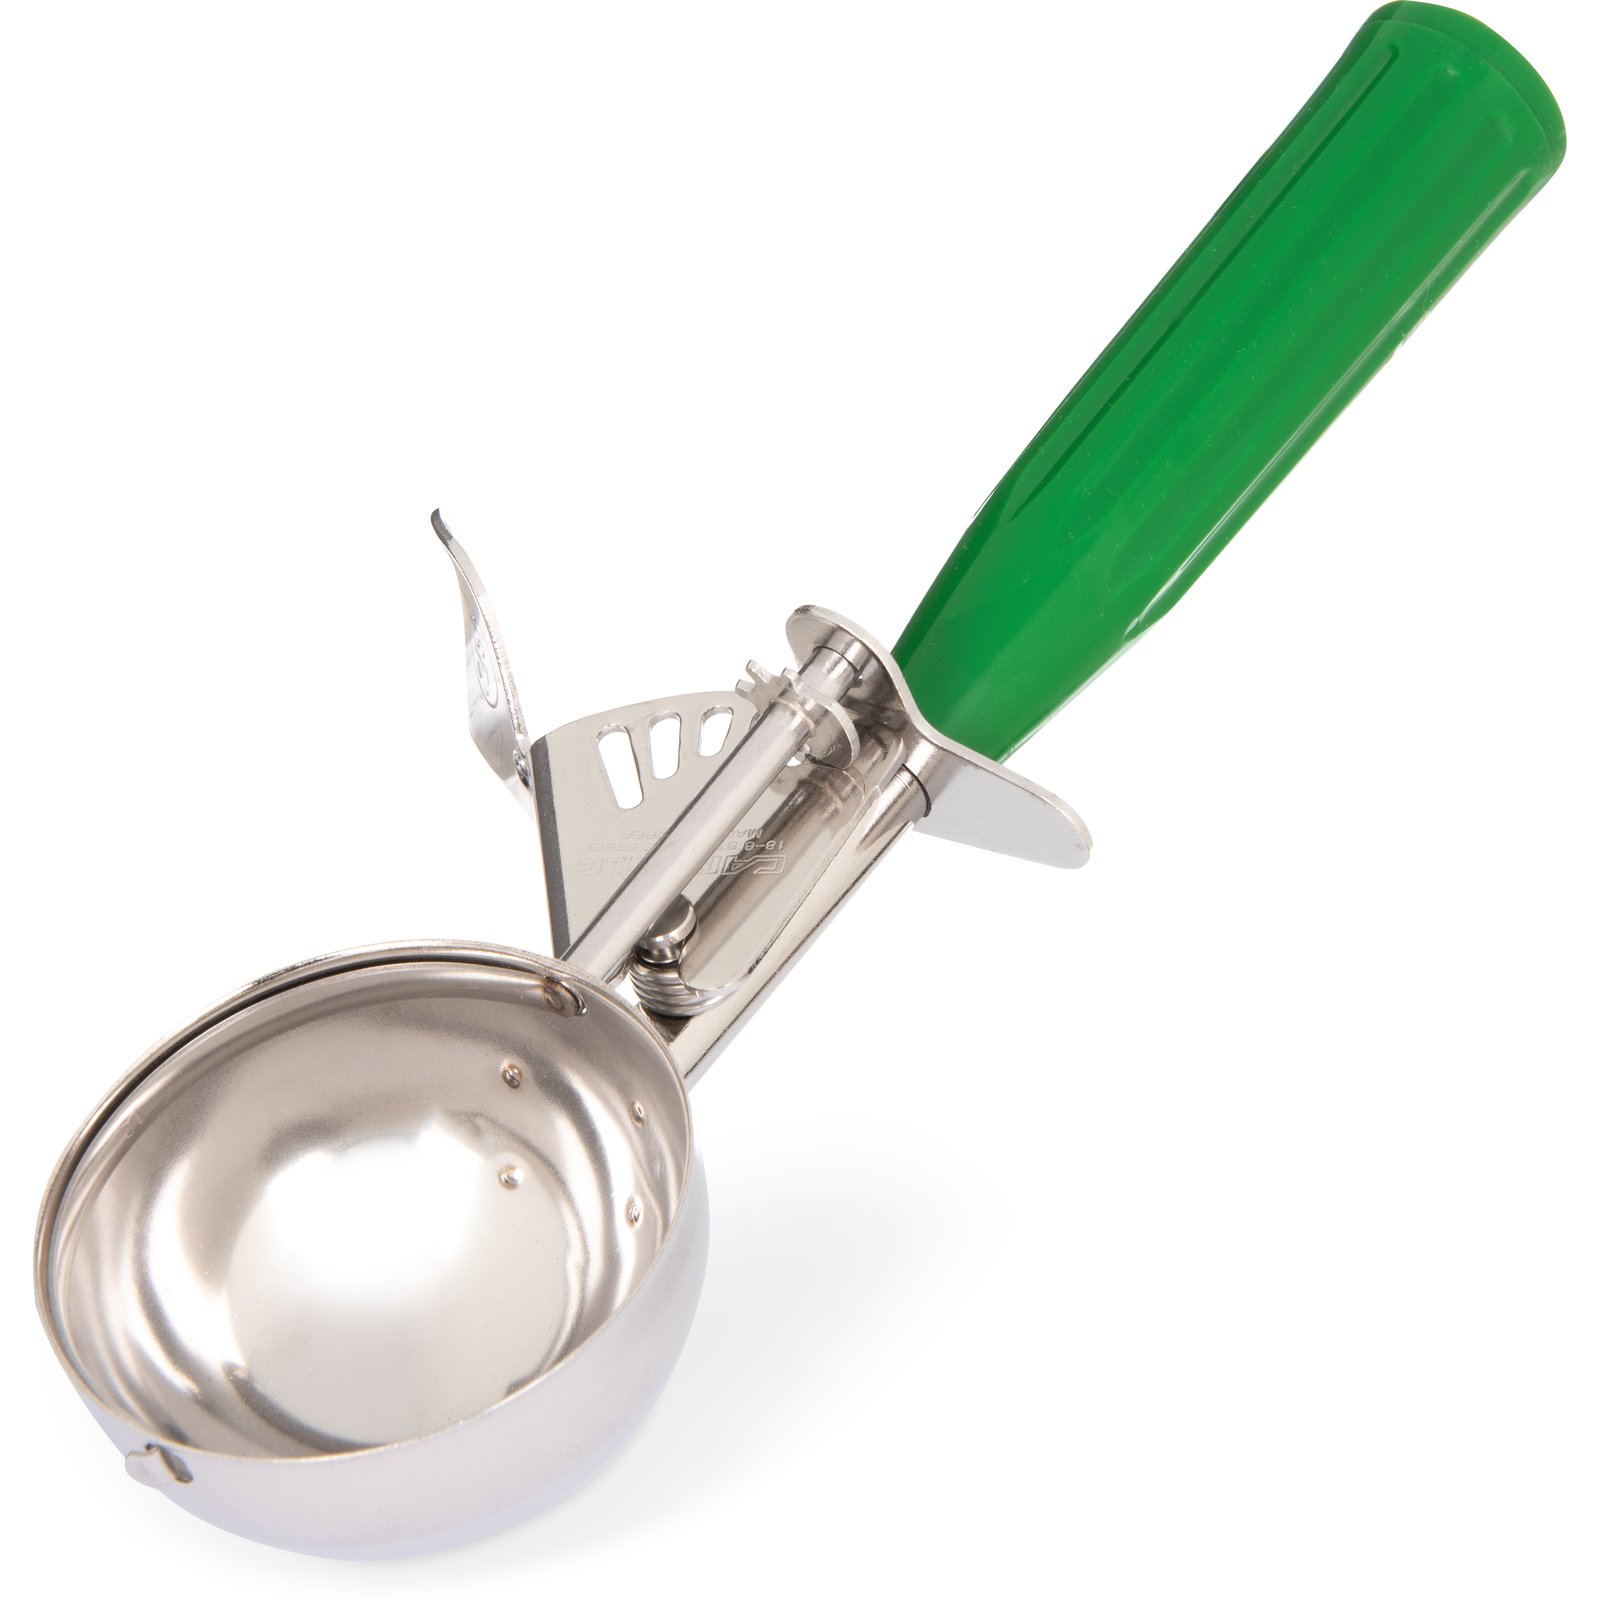 60300-12 - Stainless Steel Disher Scoop #12 Size 3.3 oz ...